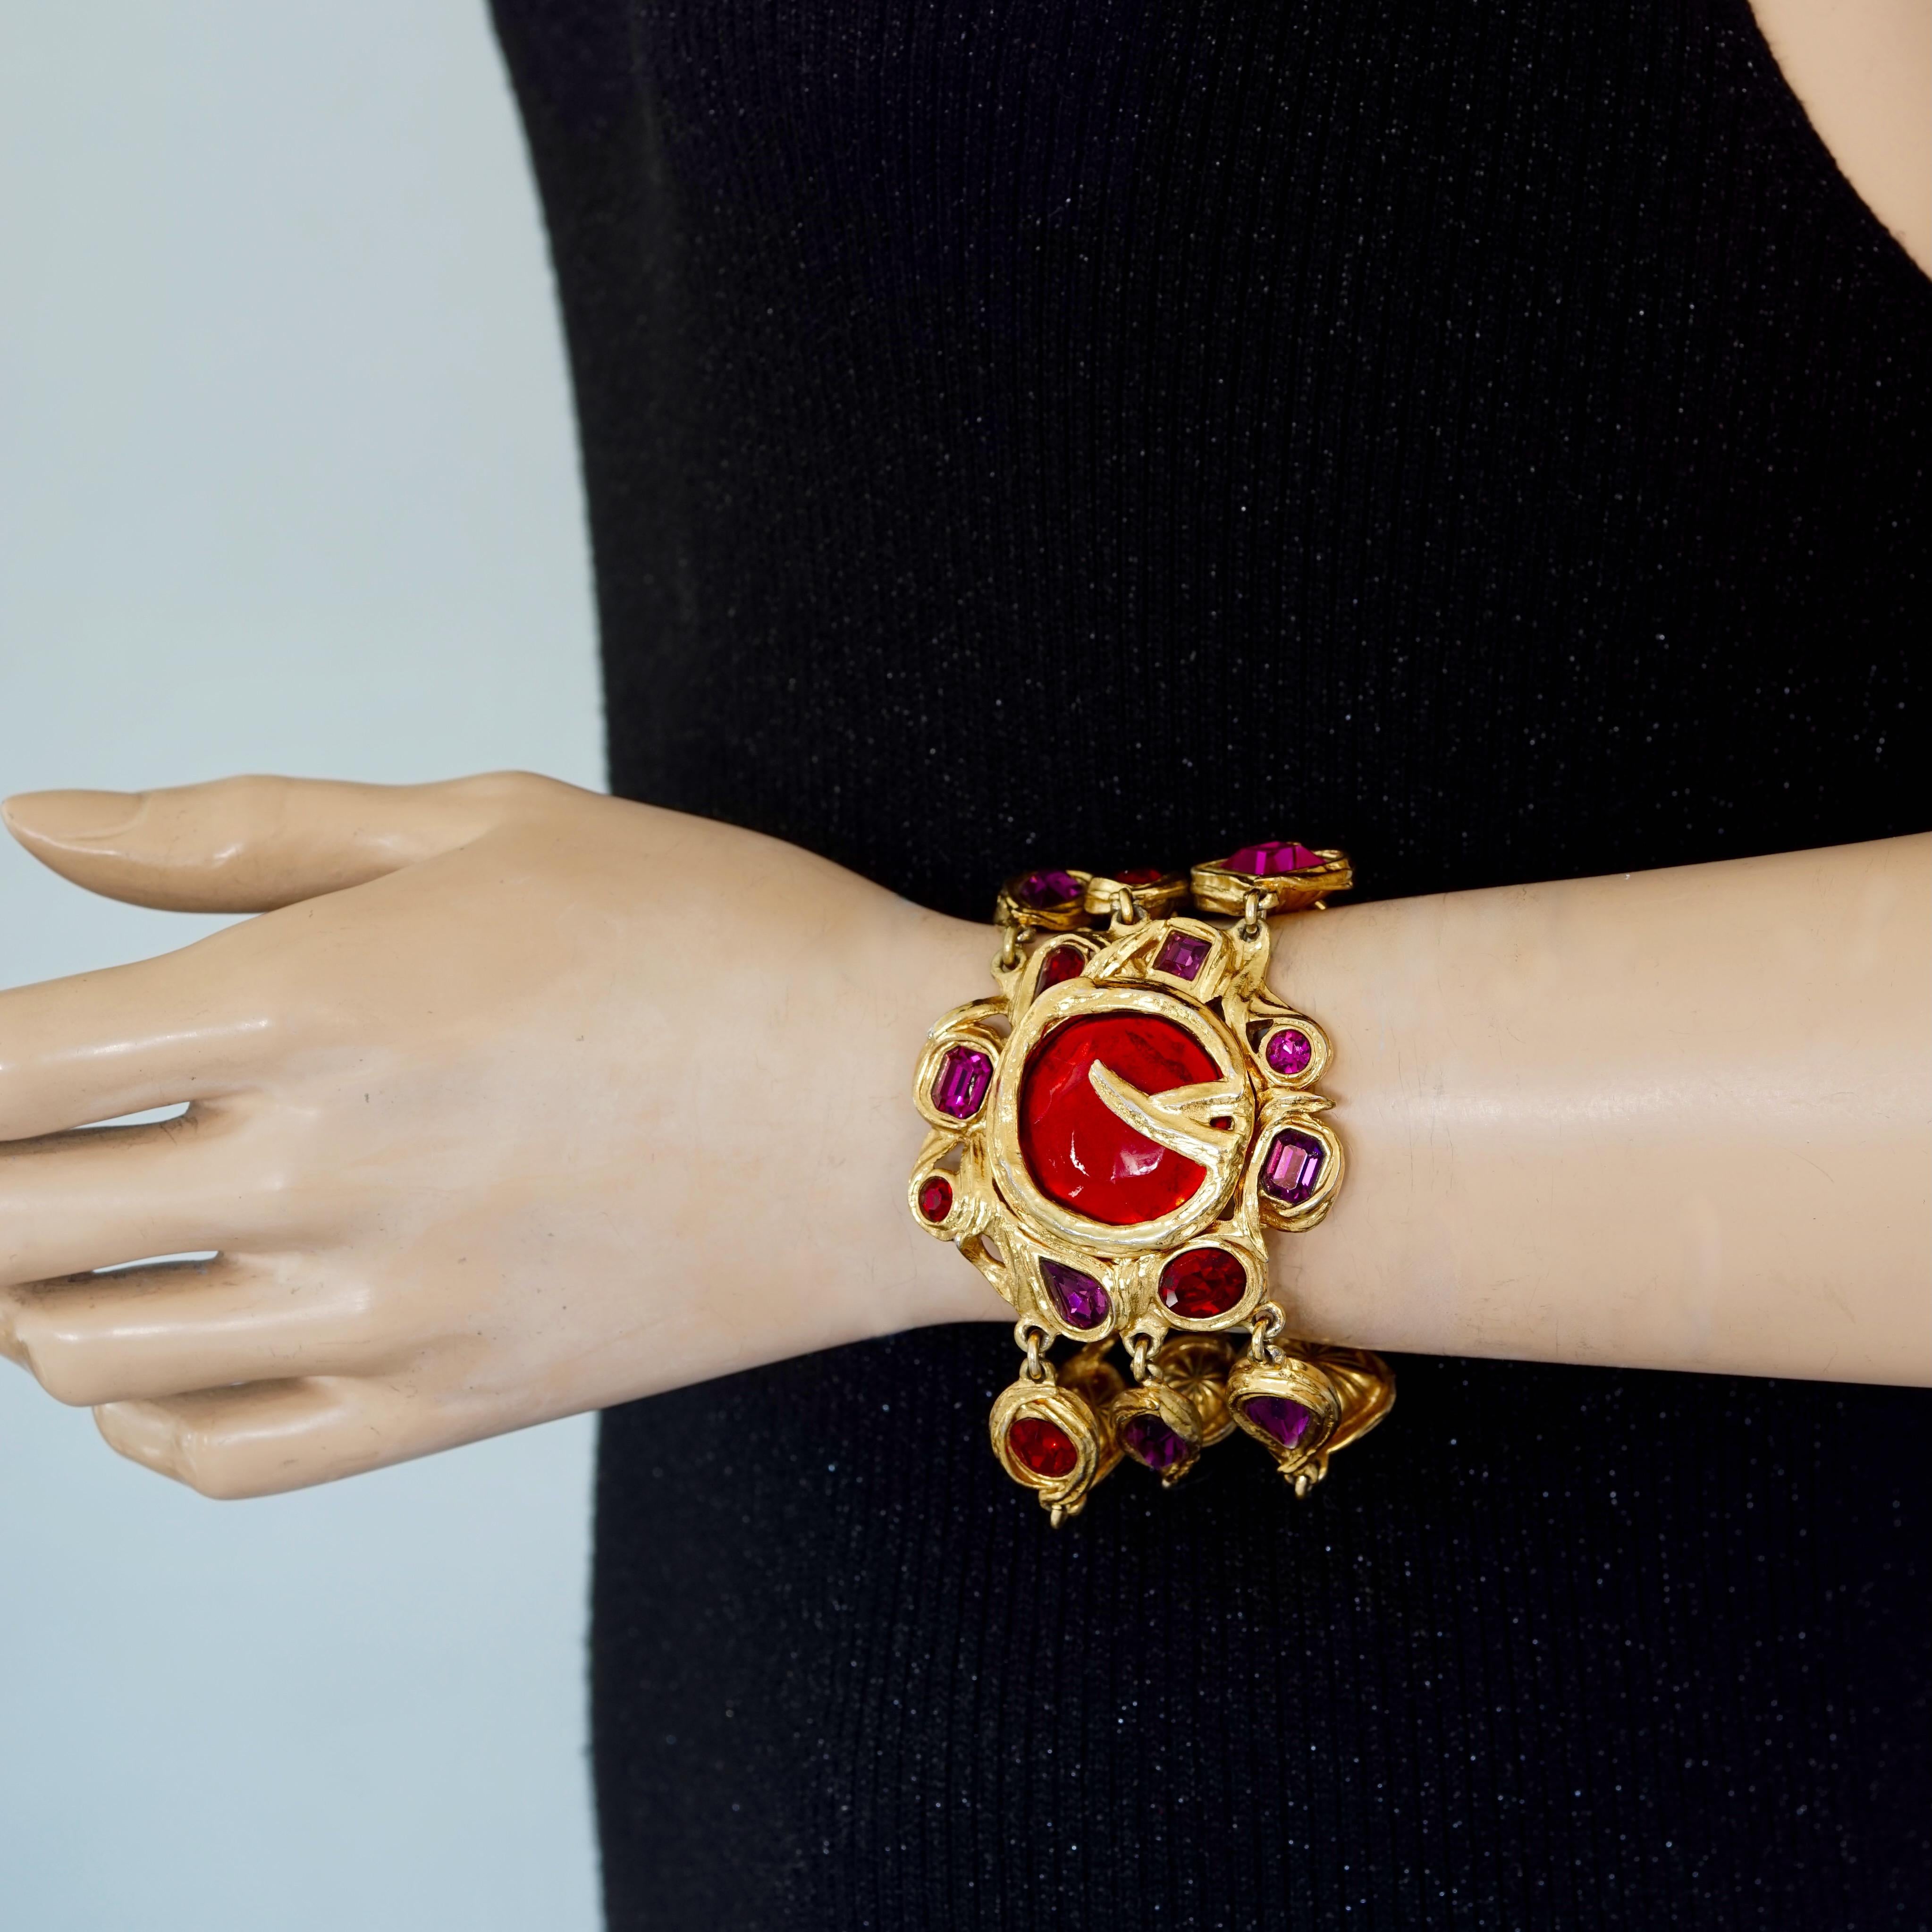 Vintage YVES SAINT LAURENT Ysl Robert Goossens Red Jewelled Cuff Bracelet

Measurements:
Height: 2.12 inches (5.4 cm)
Wearable Length: 7.68 inches (19.5 cm)

Features:
- 100% Authentic YVES SAINT LAURENT.
- Huge flower with faceted resin and